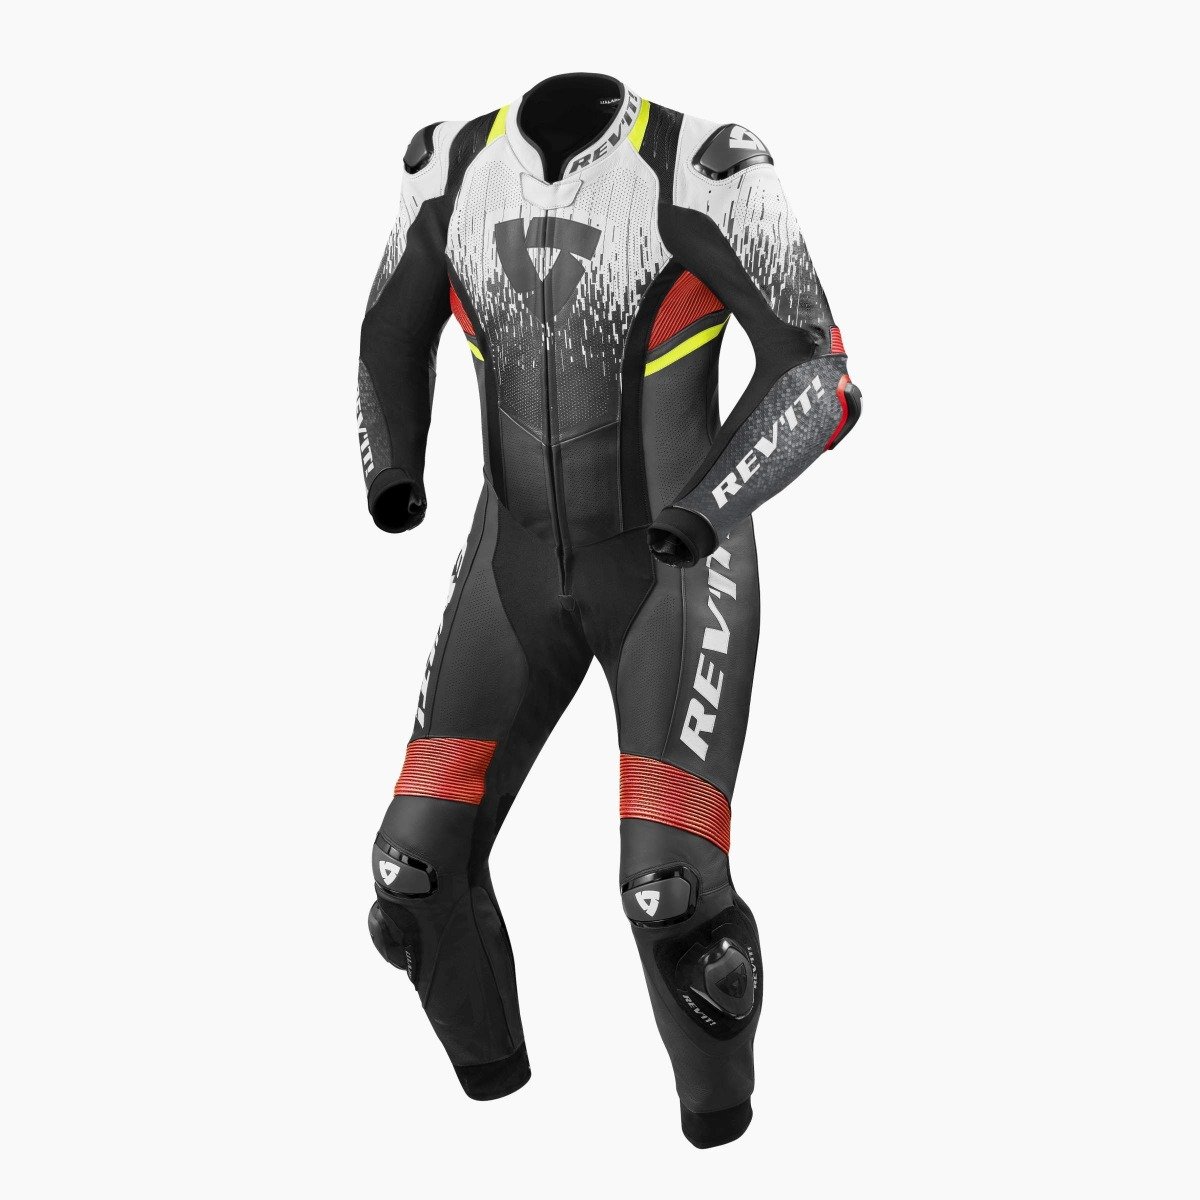 Image of REV'IT! Quantum 2 One Piece Racing Suit White Neon Red Size 52 ID 8700001313421